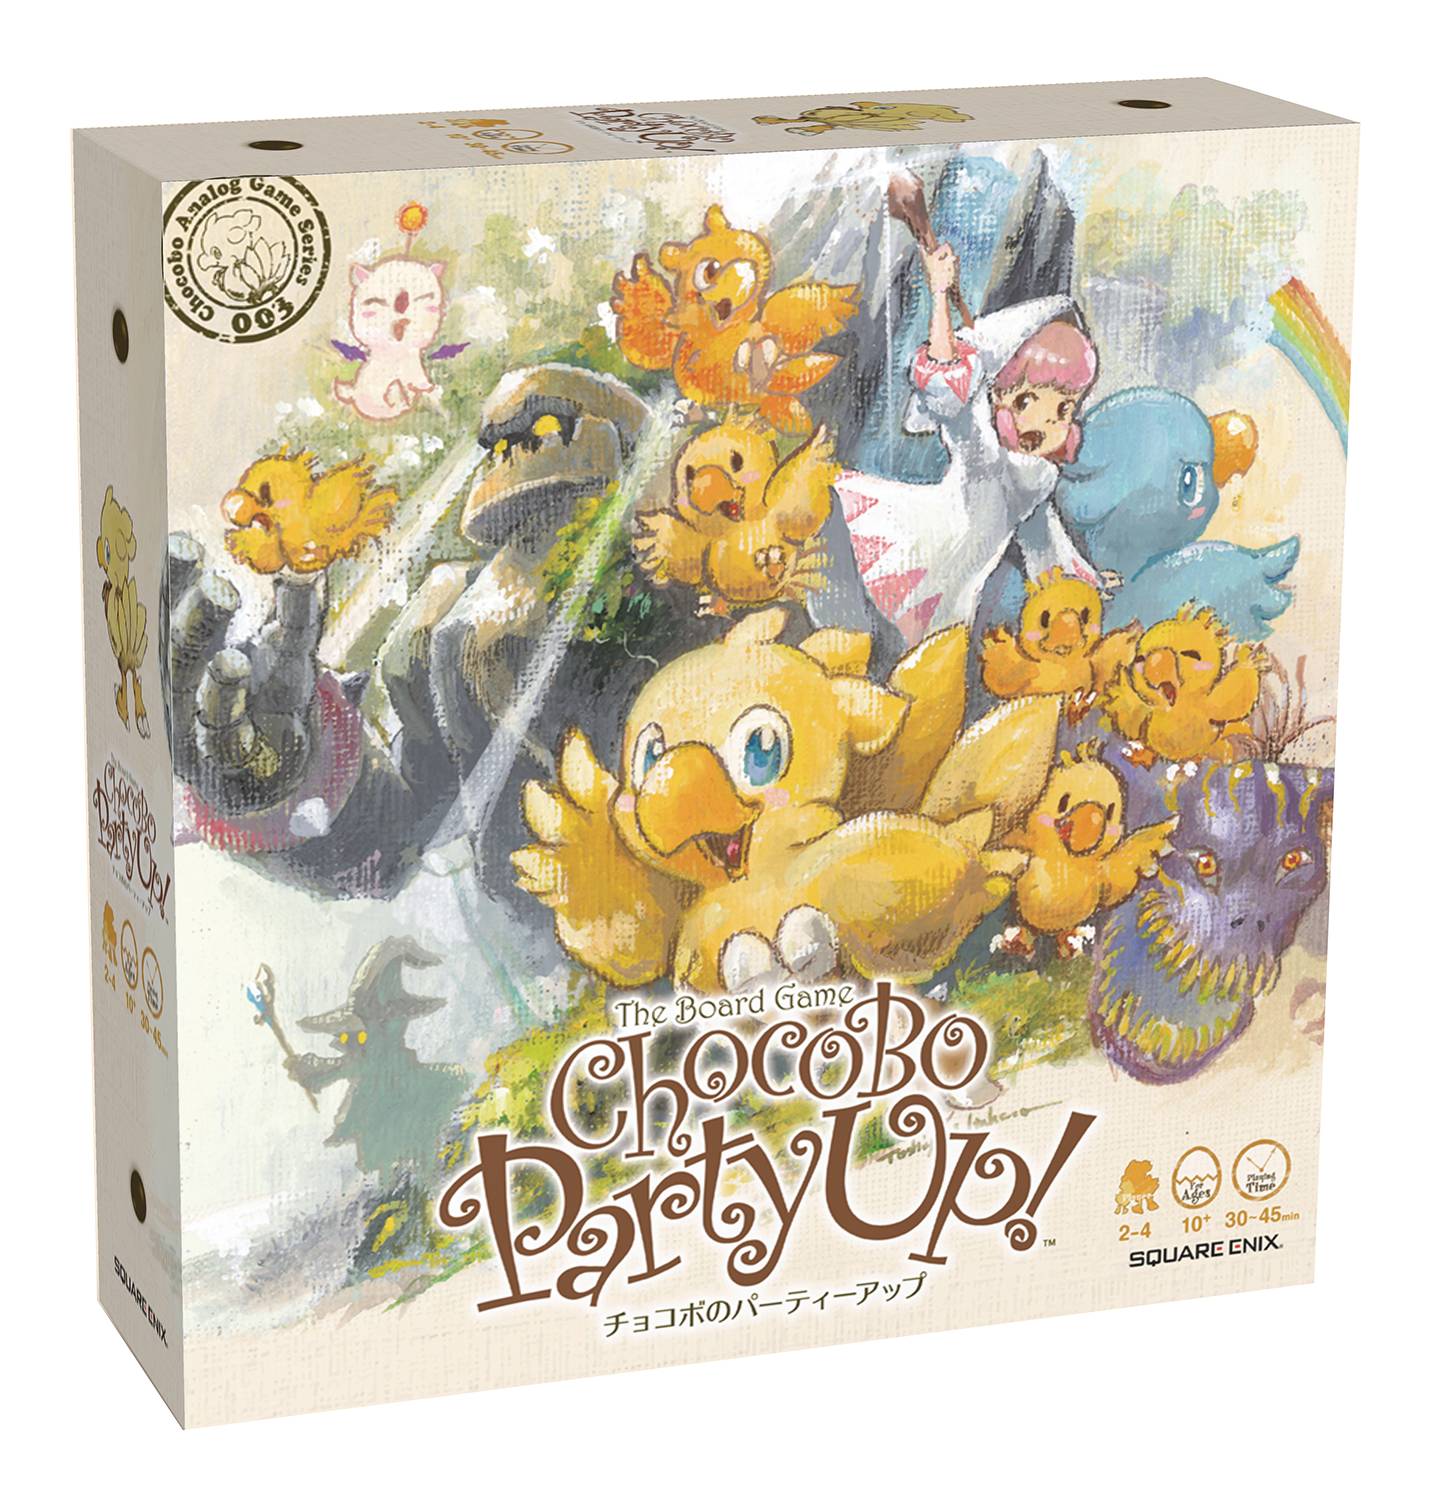 CHOCOBO PARTY UP BOARD GAME (JUN198831)